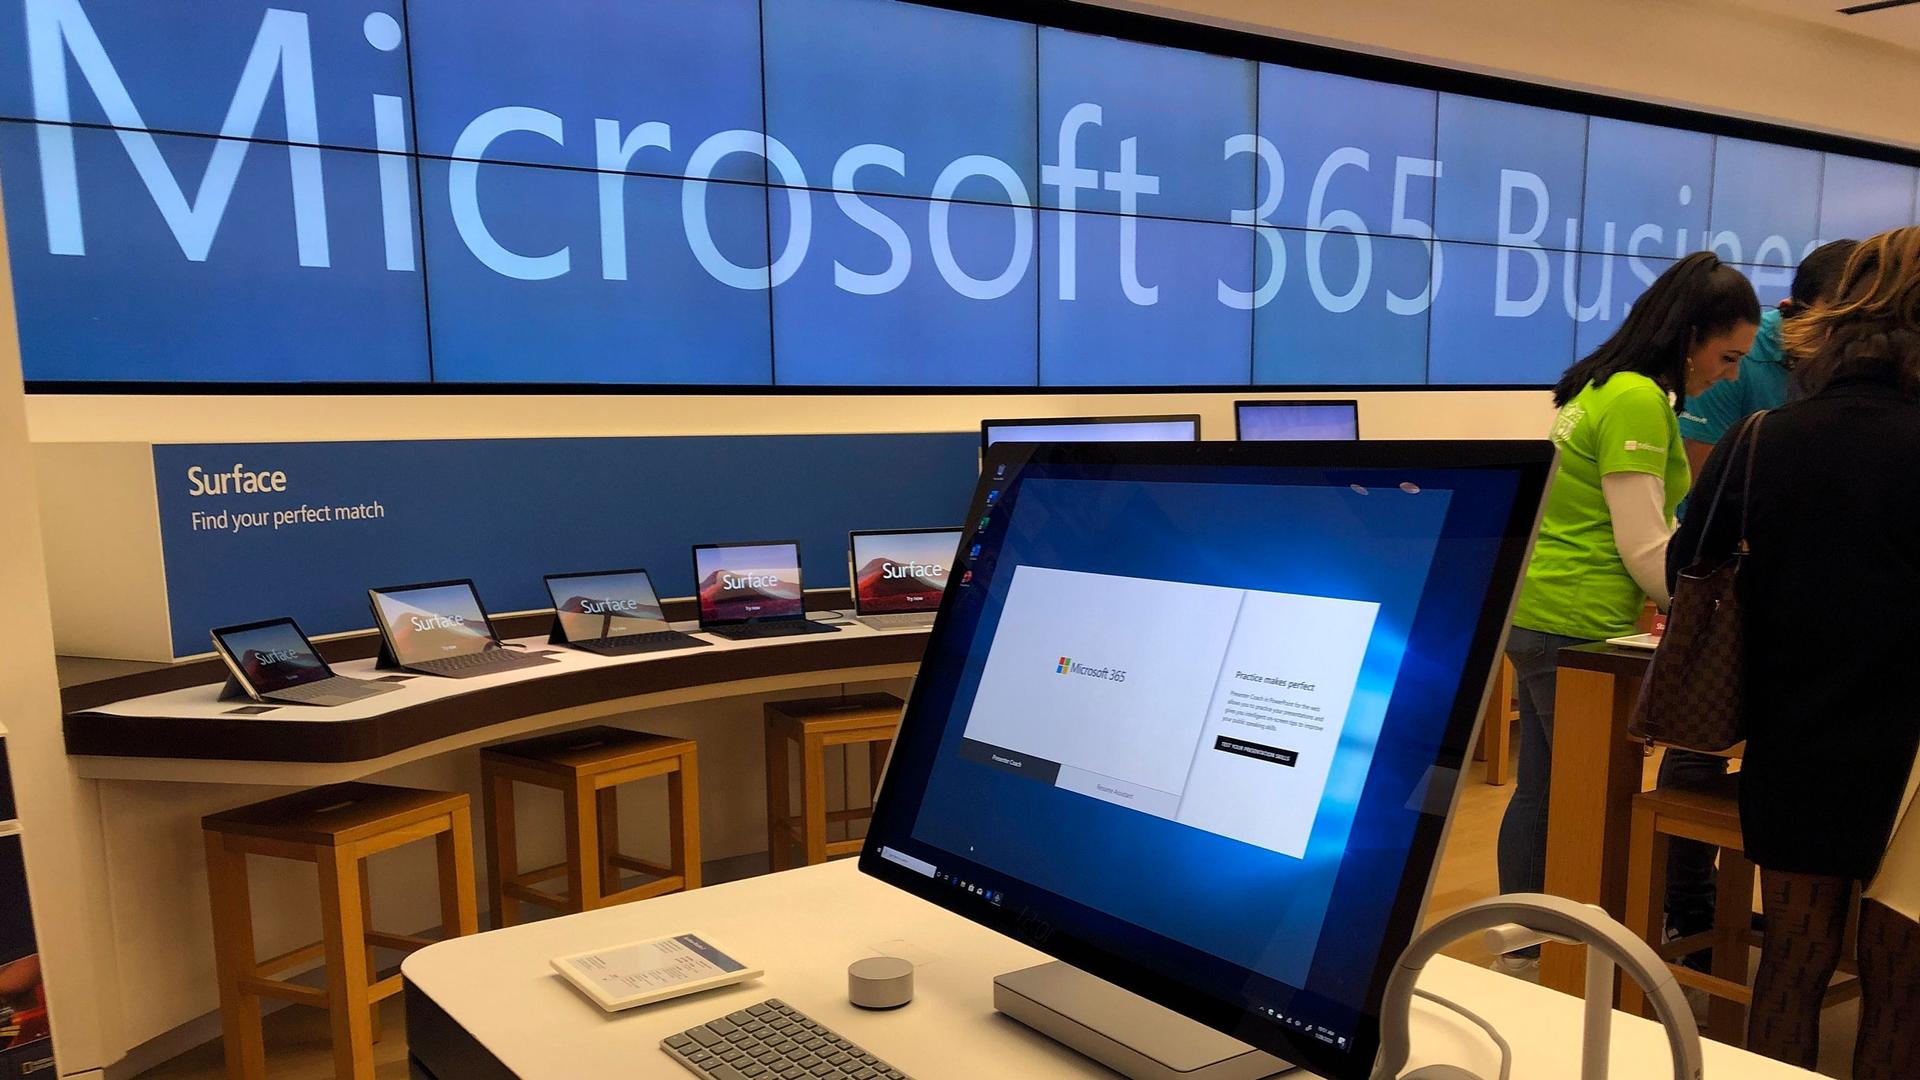 A computer monitor is shown in the nearground with a row of tablet computers in the distance under a Microsoft banner.